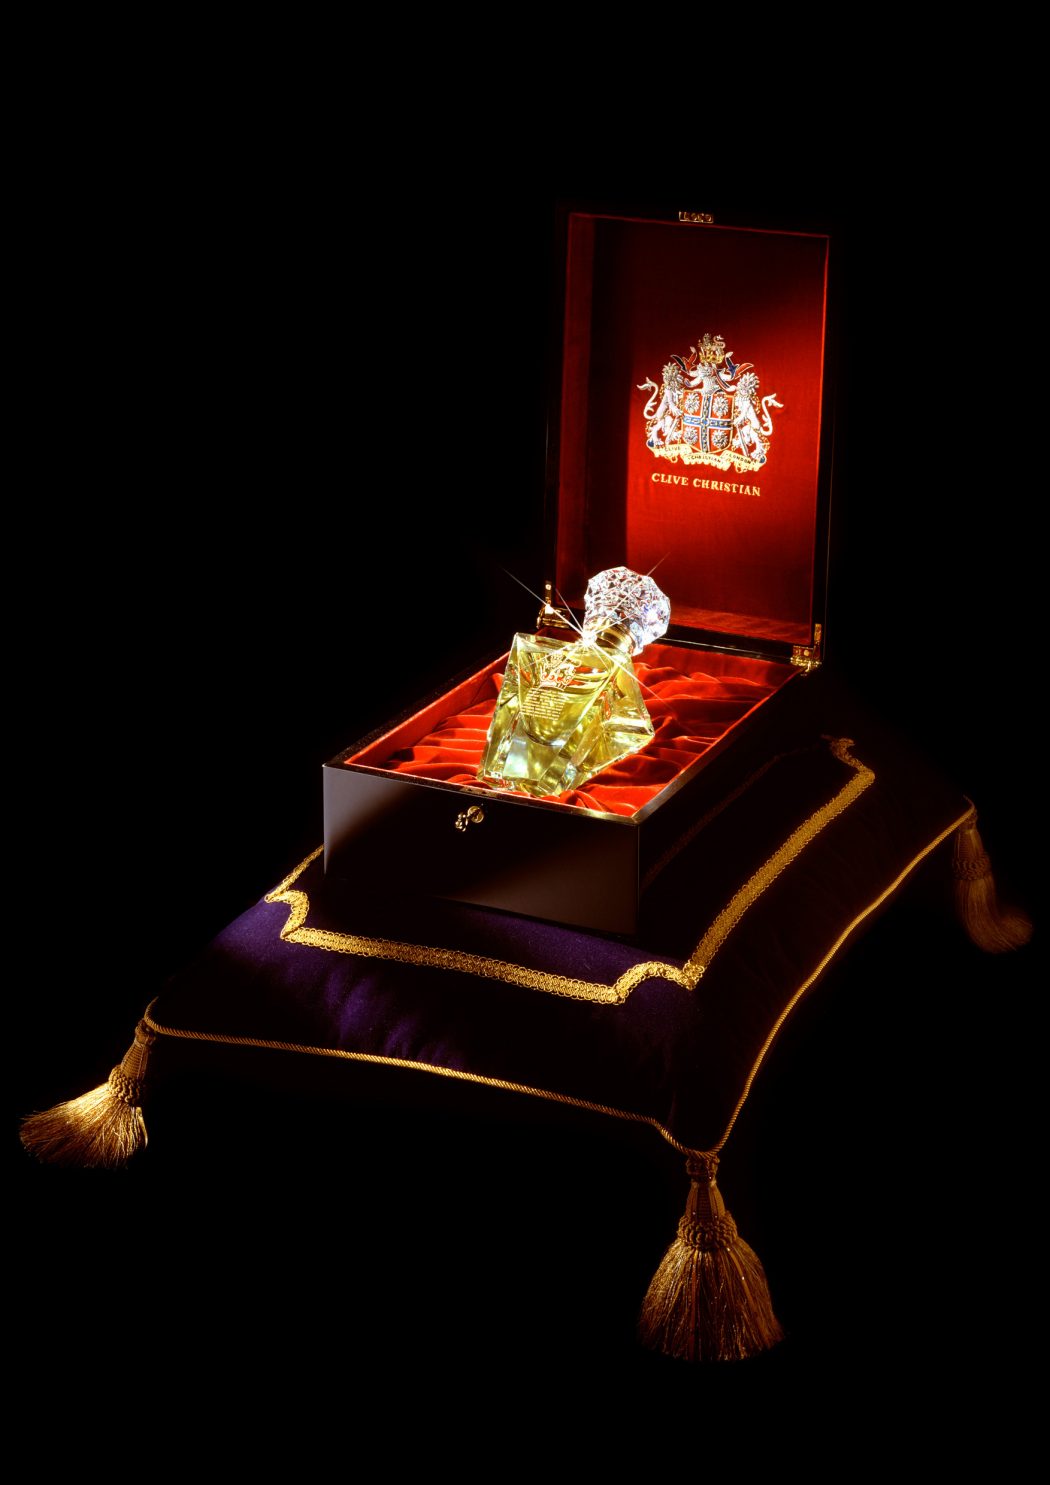 clive christian no-1 perfume imperial majesty edition in box